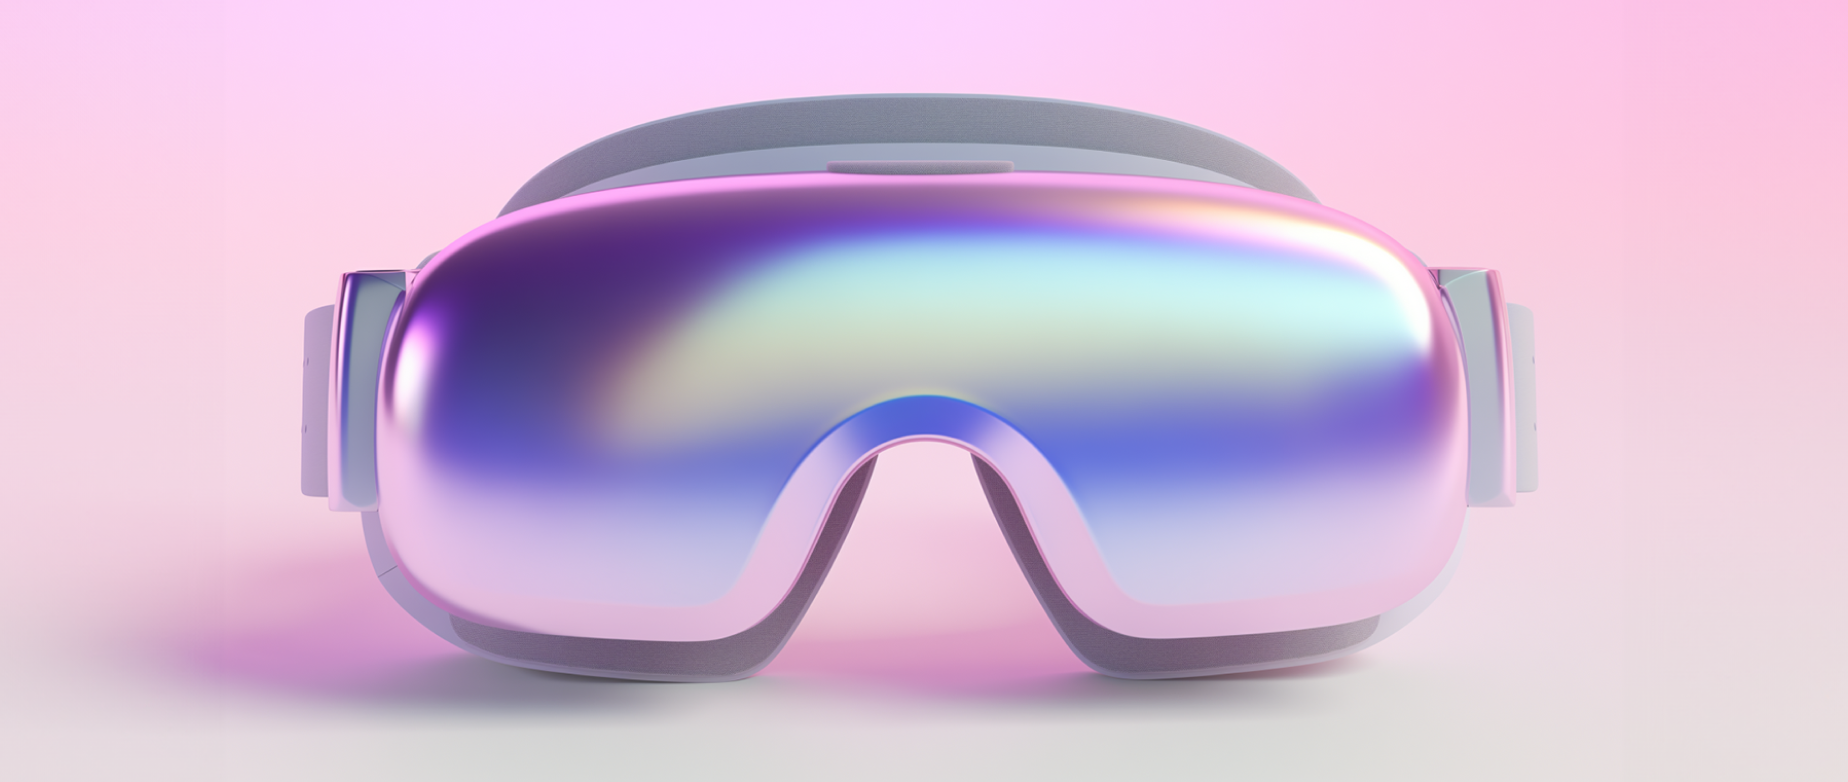 Set of goggles with purple-hued lenses on a light pink background: 3D ecommerce